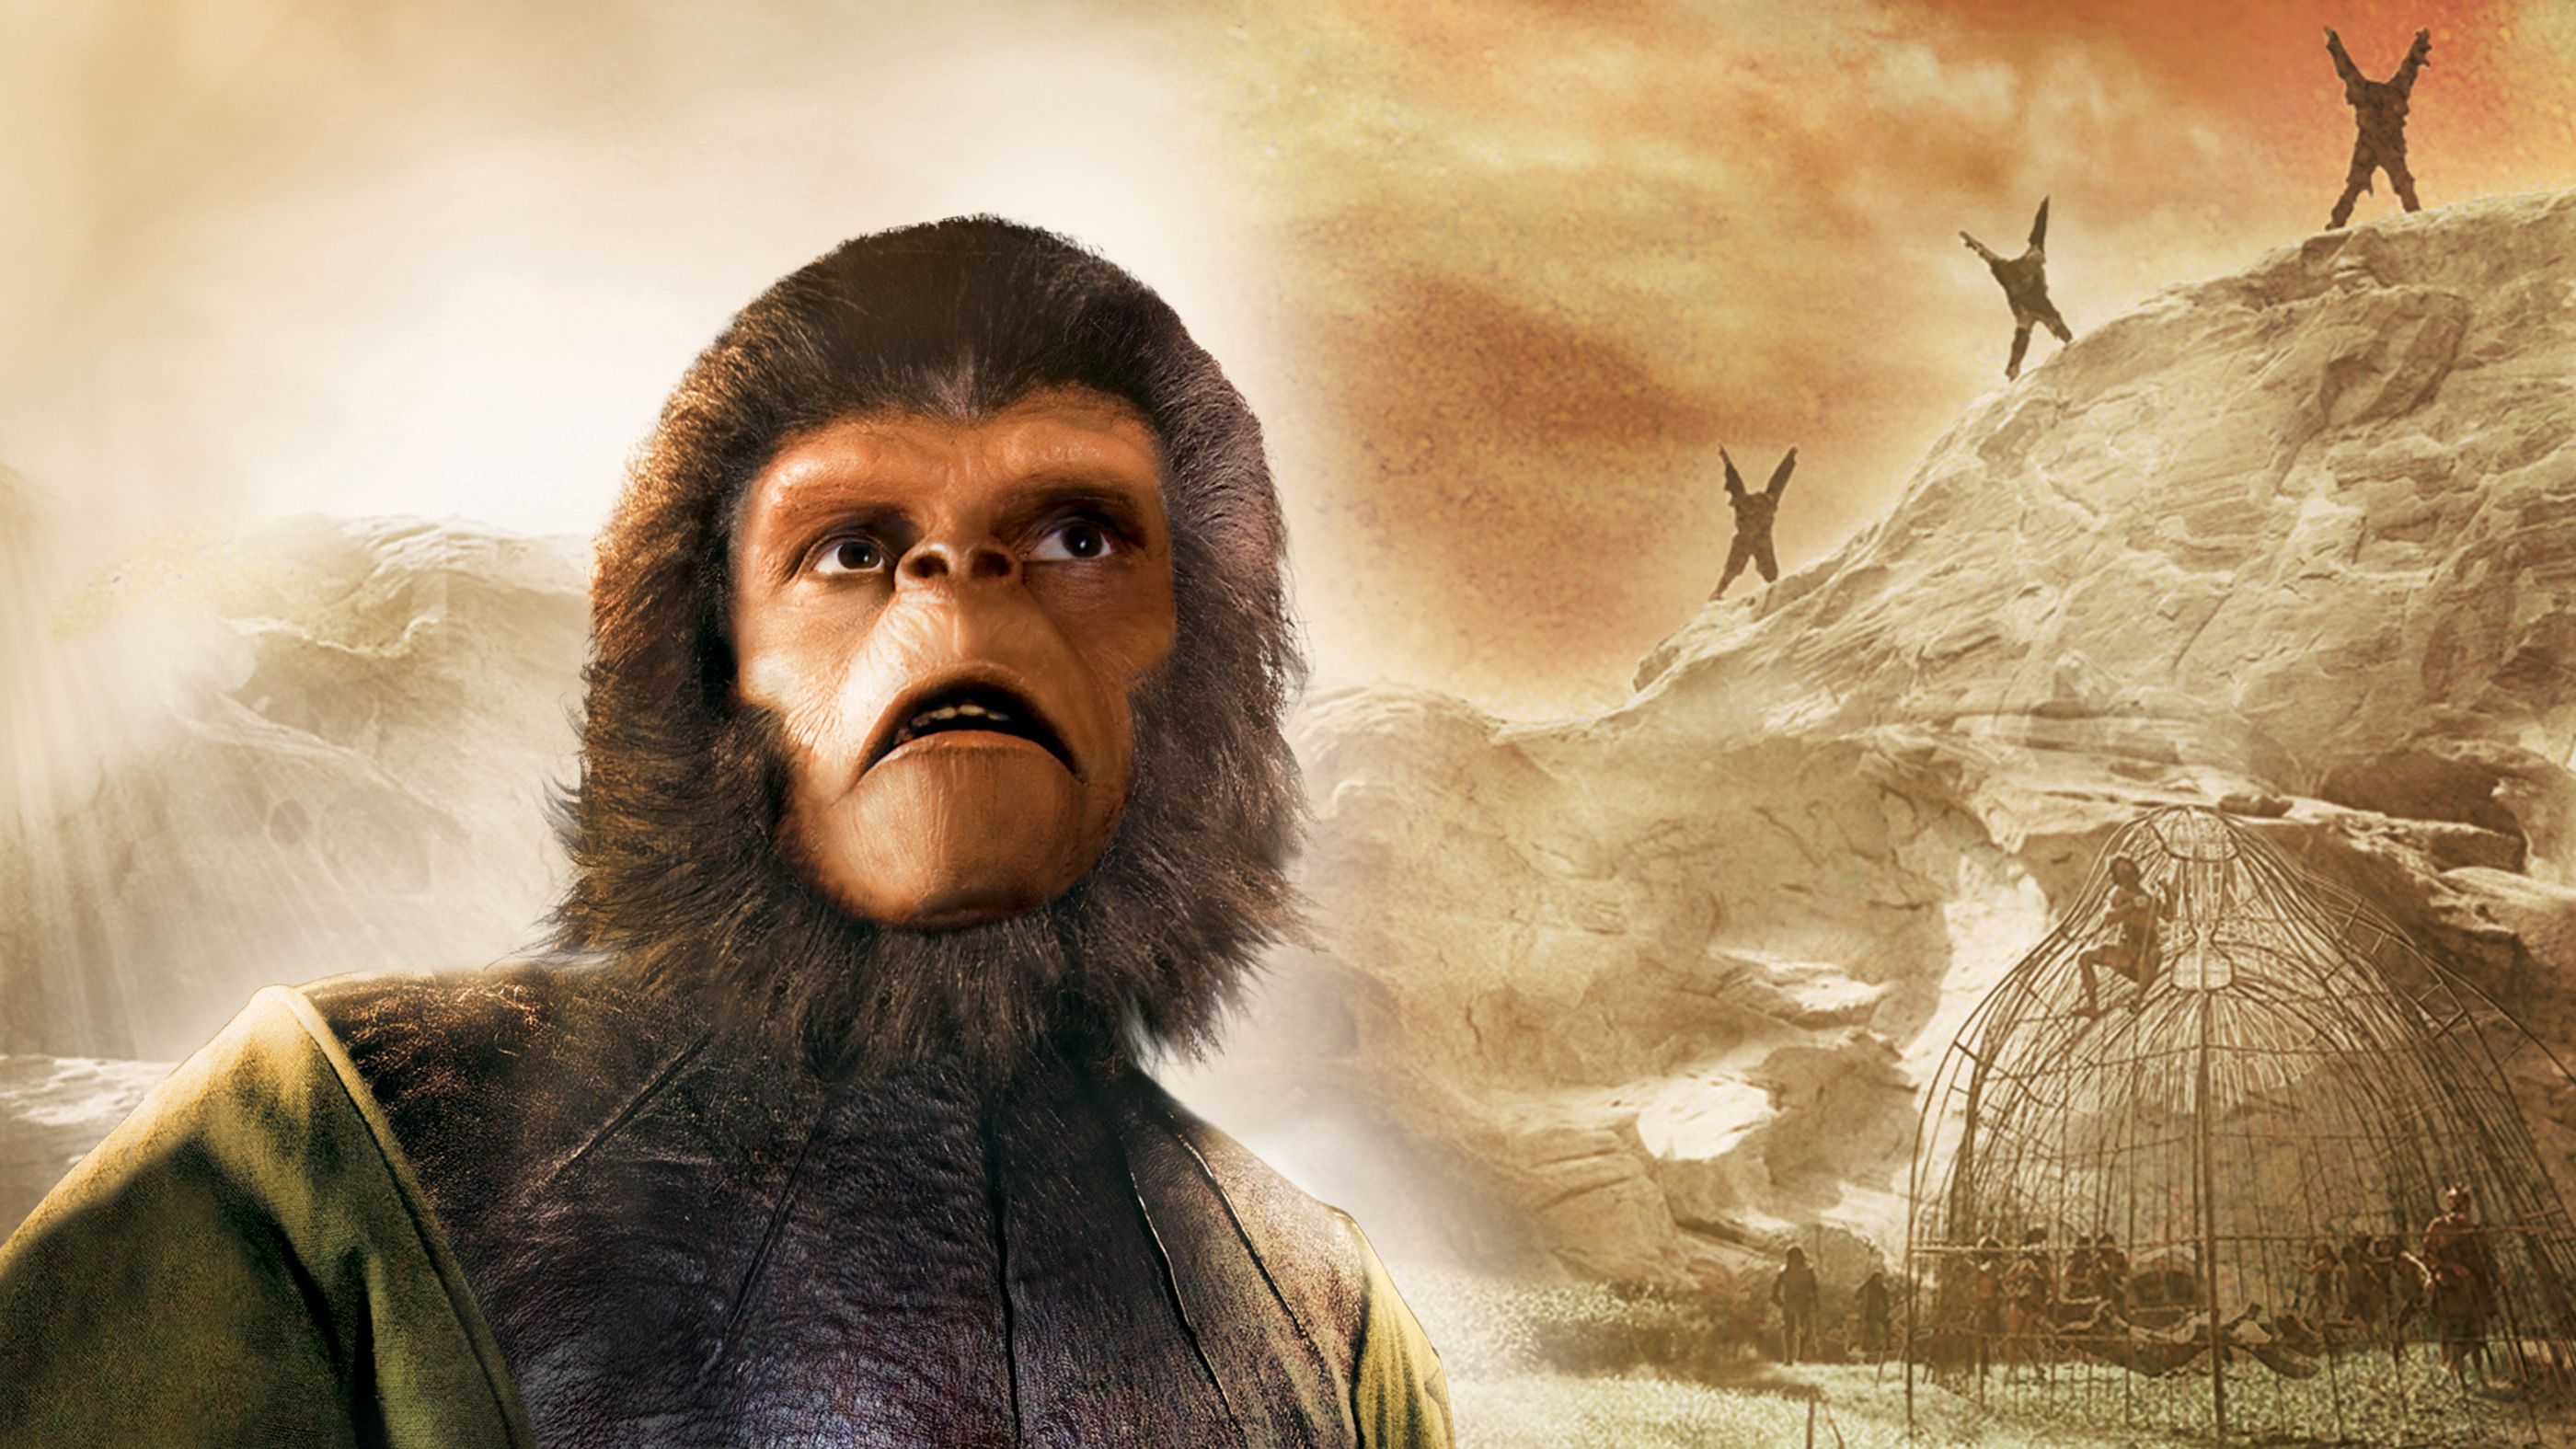 roddy mcdowall planet of the apes